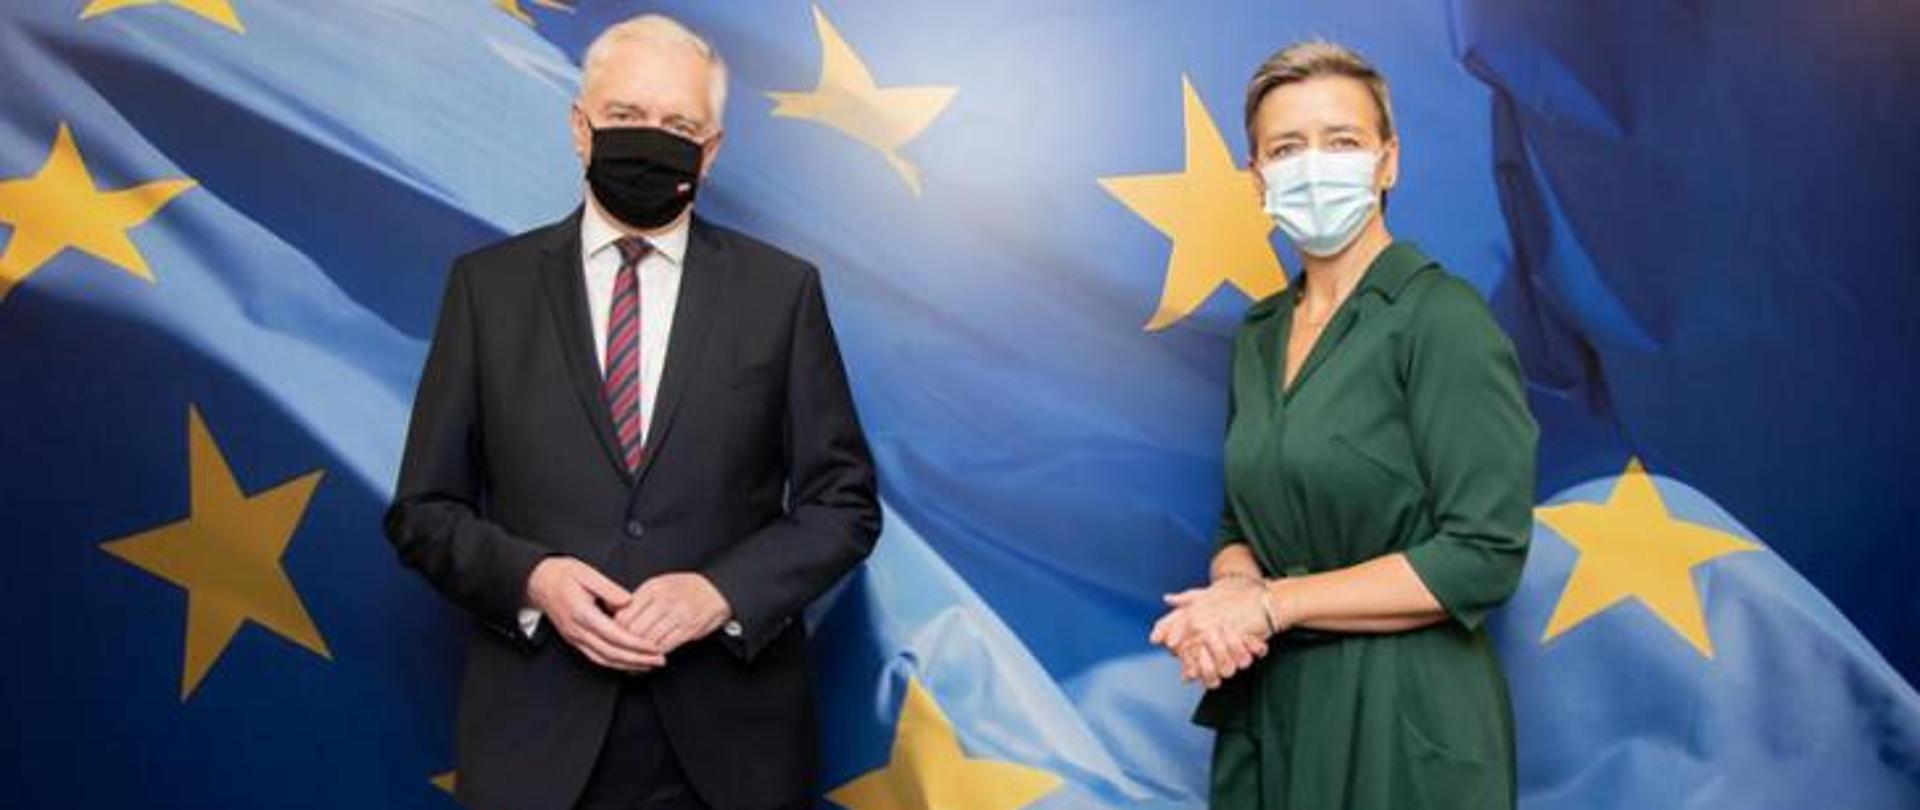 Vice Prime Minister and Minister of Development, Labour and Technology Jarosław Gowin with a mask on his face; Executive Vice-President of the European Commission for Competition Margrethe Vestager stands on his right side. At the back there is a flag of the EU.